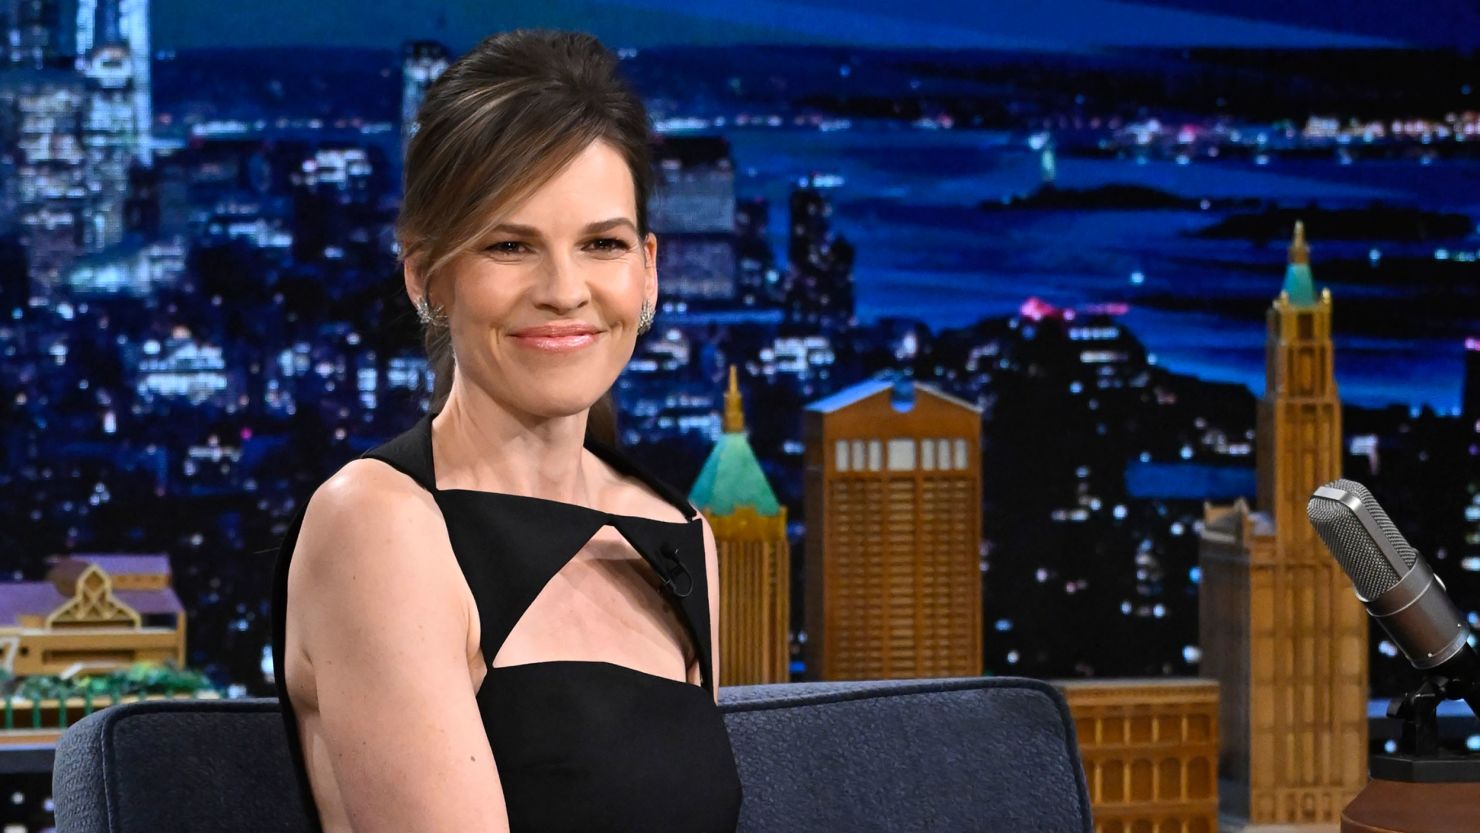 Hilary Swank during an interview on "The Tonight Show" last week.